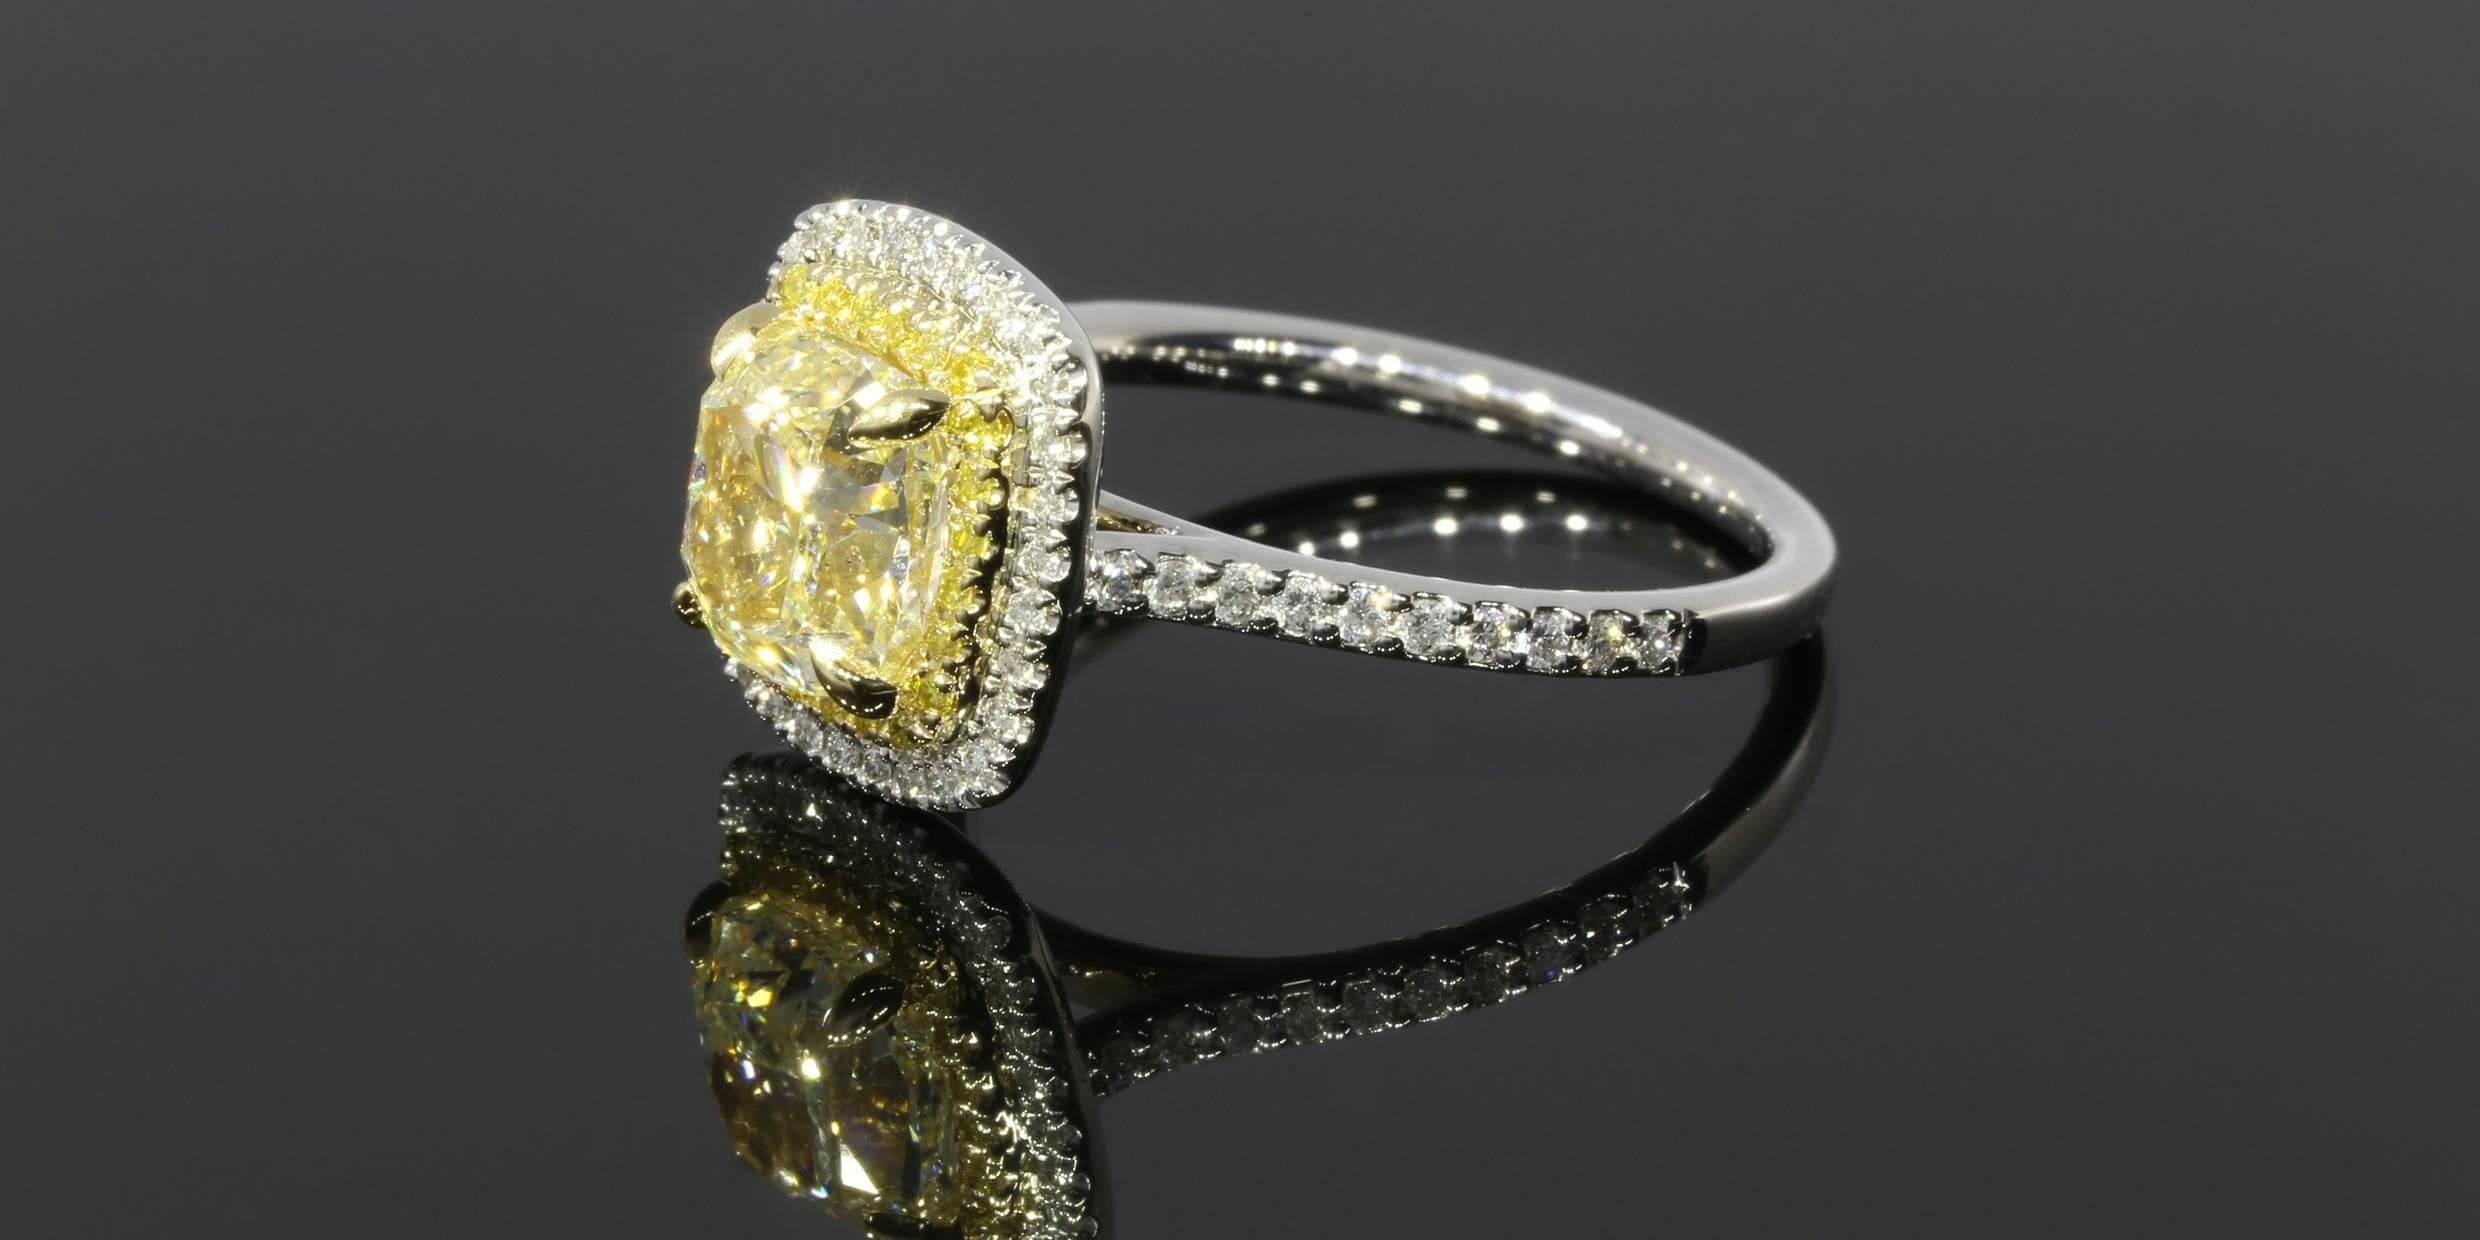 Canary diamonds have a beautiful warmth that sparkle like sunshine. They are a unique alternative to the traditional white diamond engagement ring. The center diamond is a 2.02CT natural fancy light yellow cushion cut diamond with a SI2 clarity. It